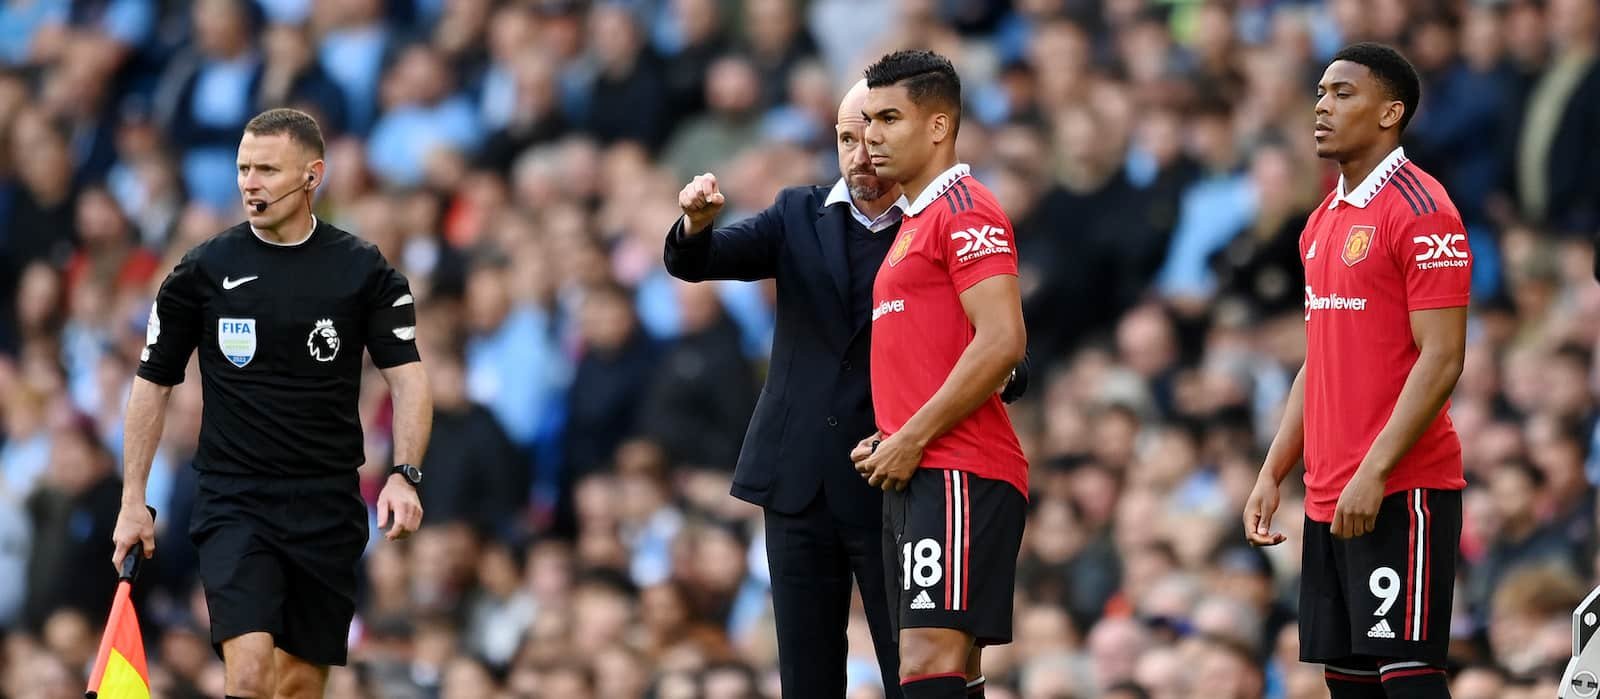 Erik ten Hag says Casemiro’s poor form is down to injuries, backs him to play major role in hunt for the FA Cup – Man United News And Transfer News